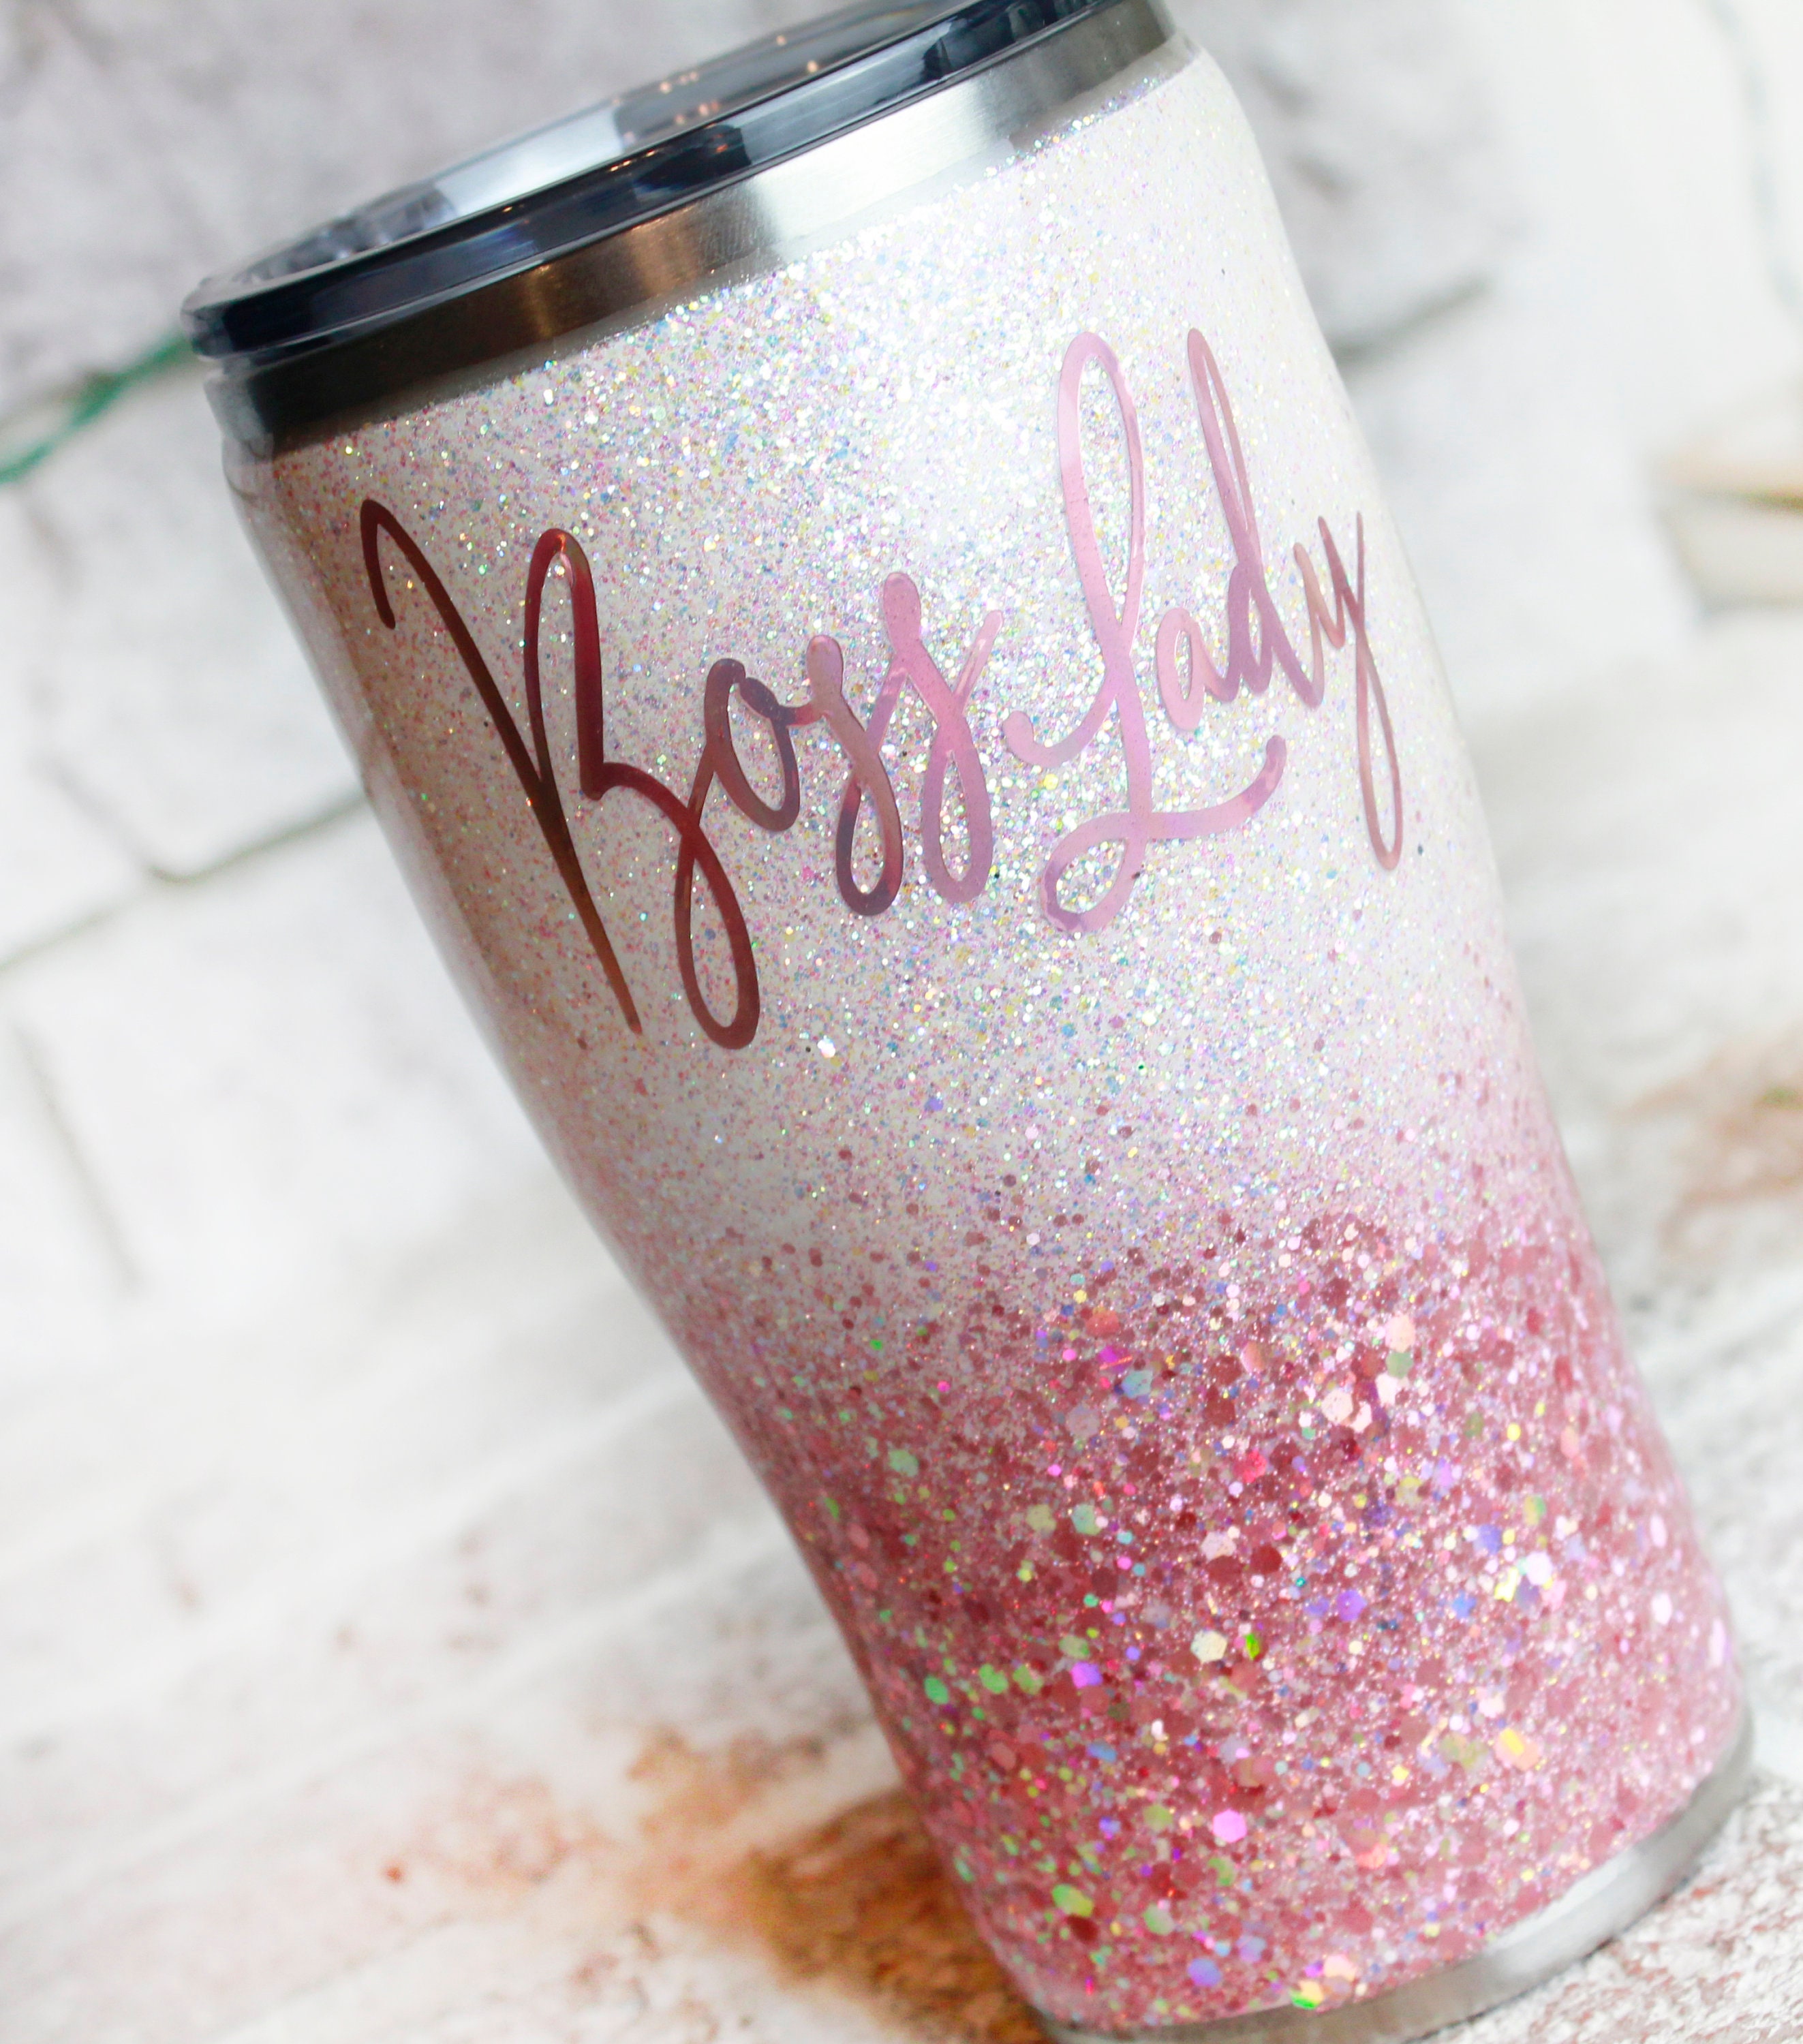 Personalized Tumbler Glitter Ombre Gold and Pink